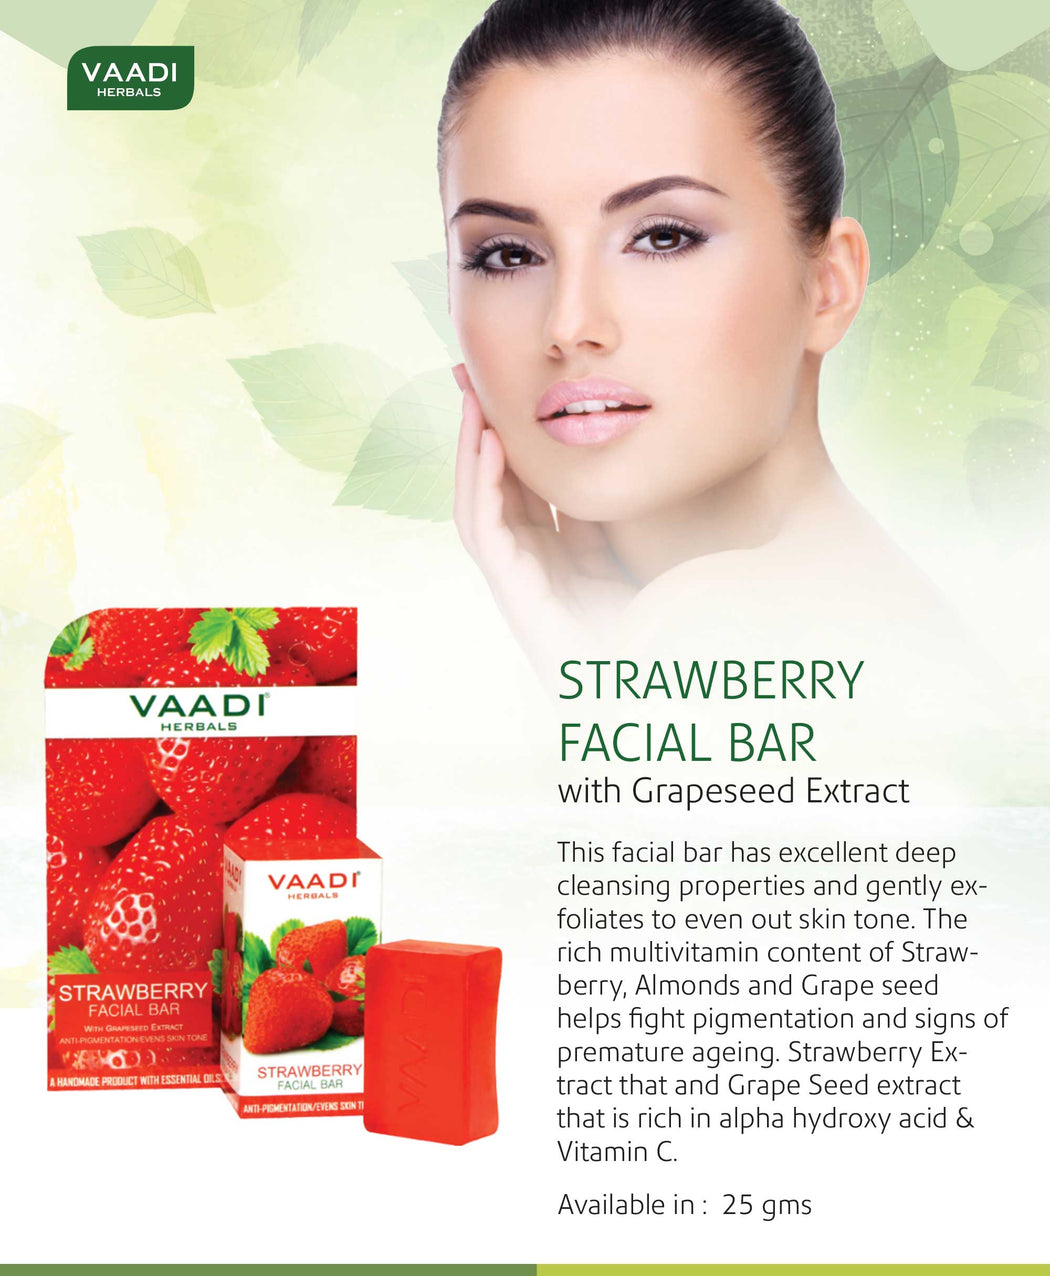 Pack of 4 Strawberry Facial Bars with Grapeseed Extract (25 gms x 4)